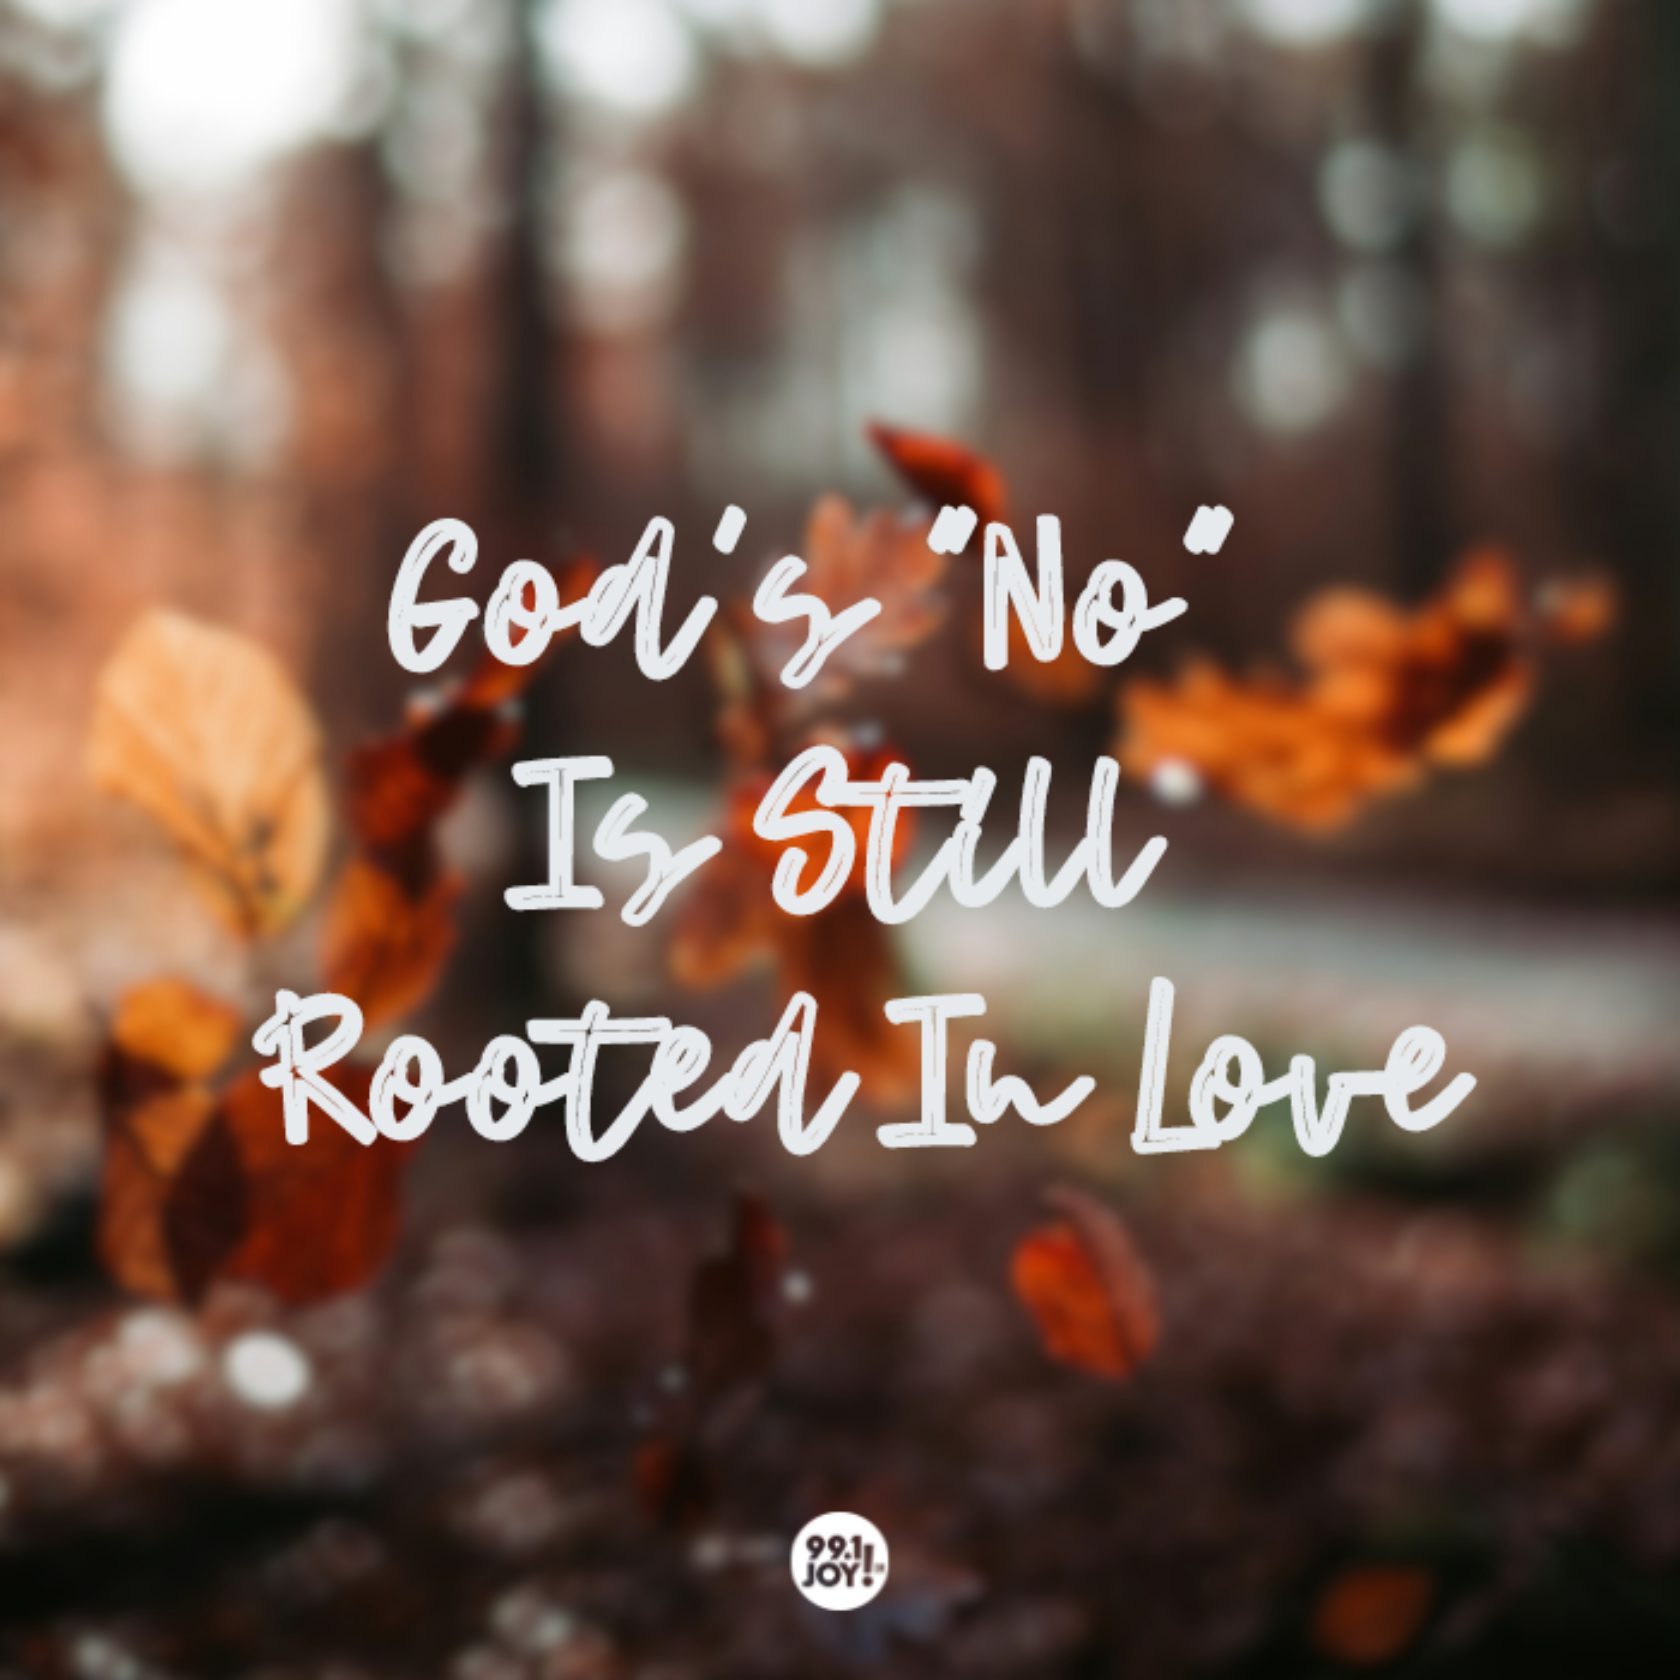 God’s “No” Is Still Rooted In Love